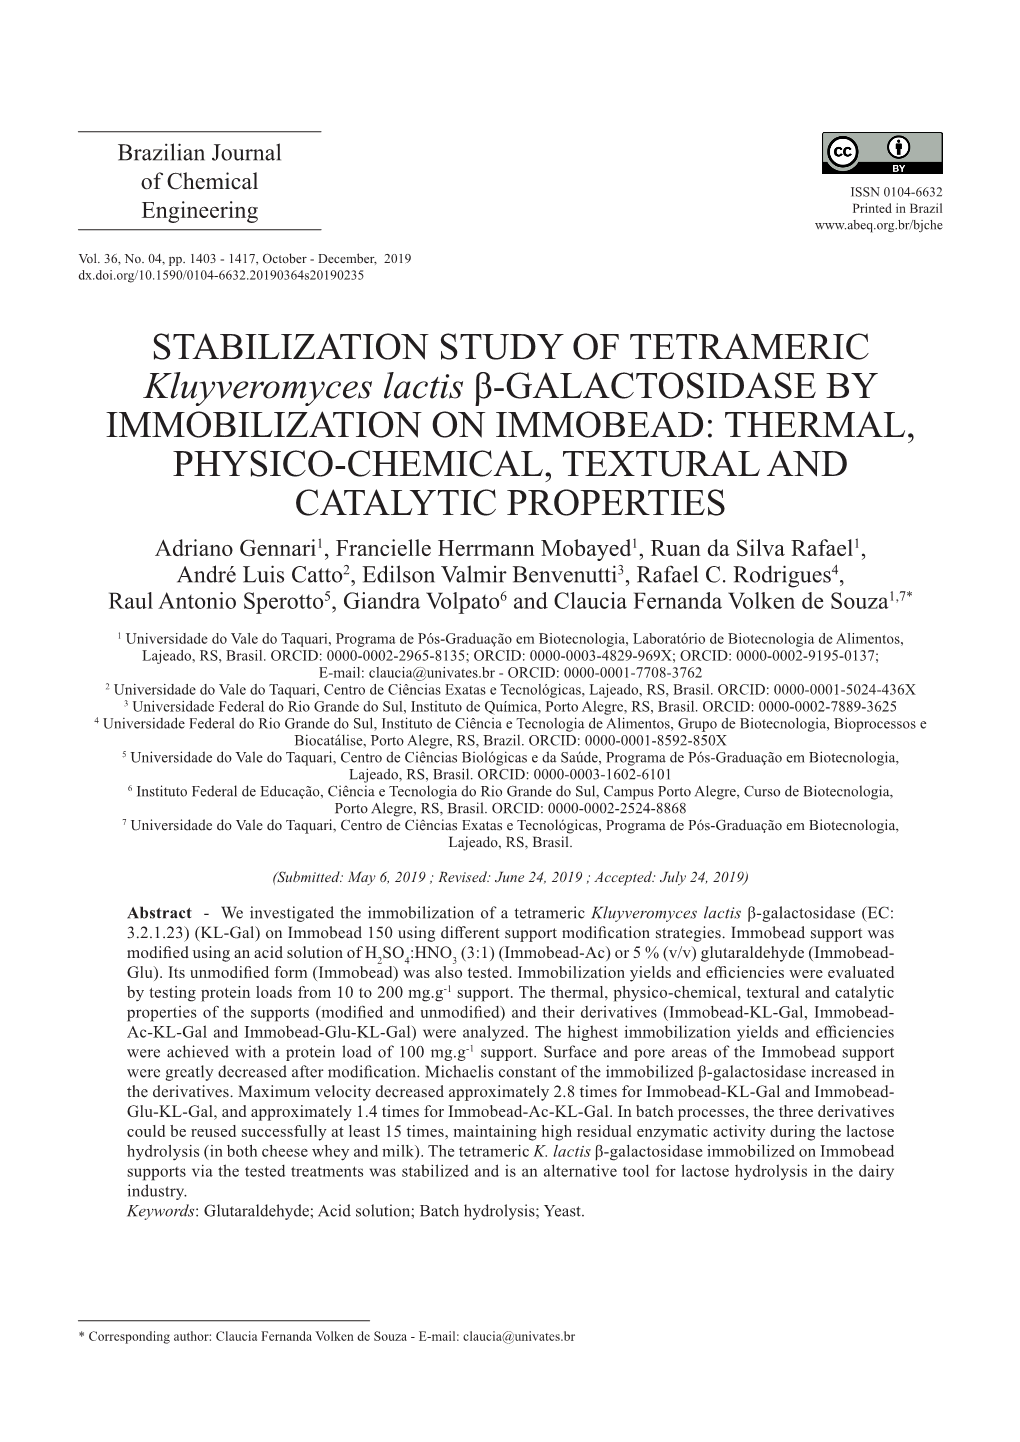 STABILIZATION STUDY of TETRAMERIC Kluyveromyces Lactis Β-GALACTOSIDASE by IMMOBILIZATION on IMMOBEAD: THERMAL, PHYSICO-CHEMICAL